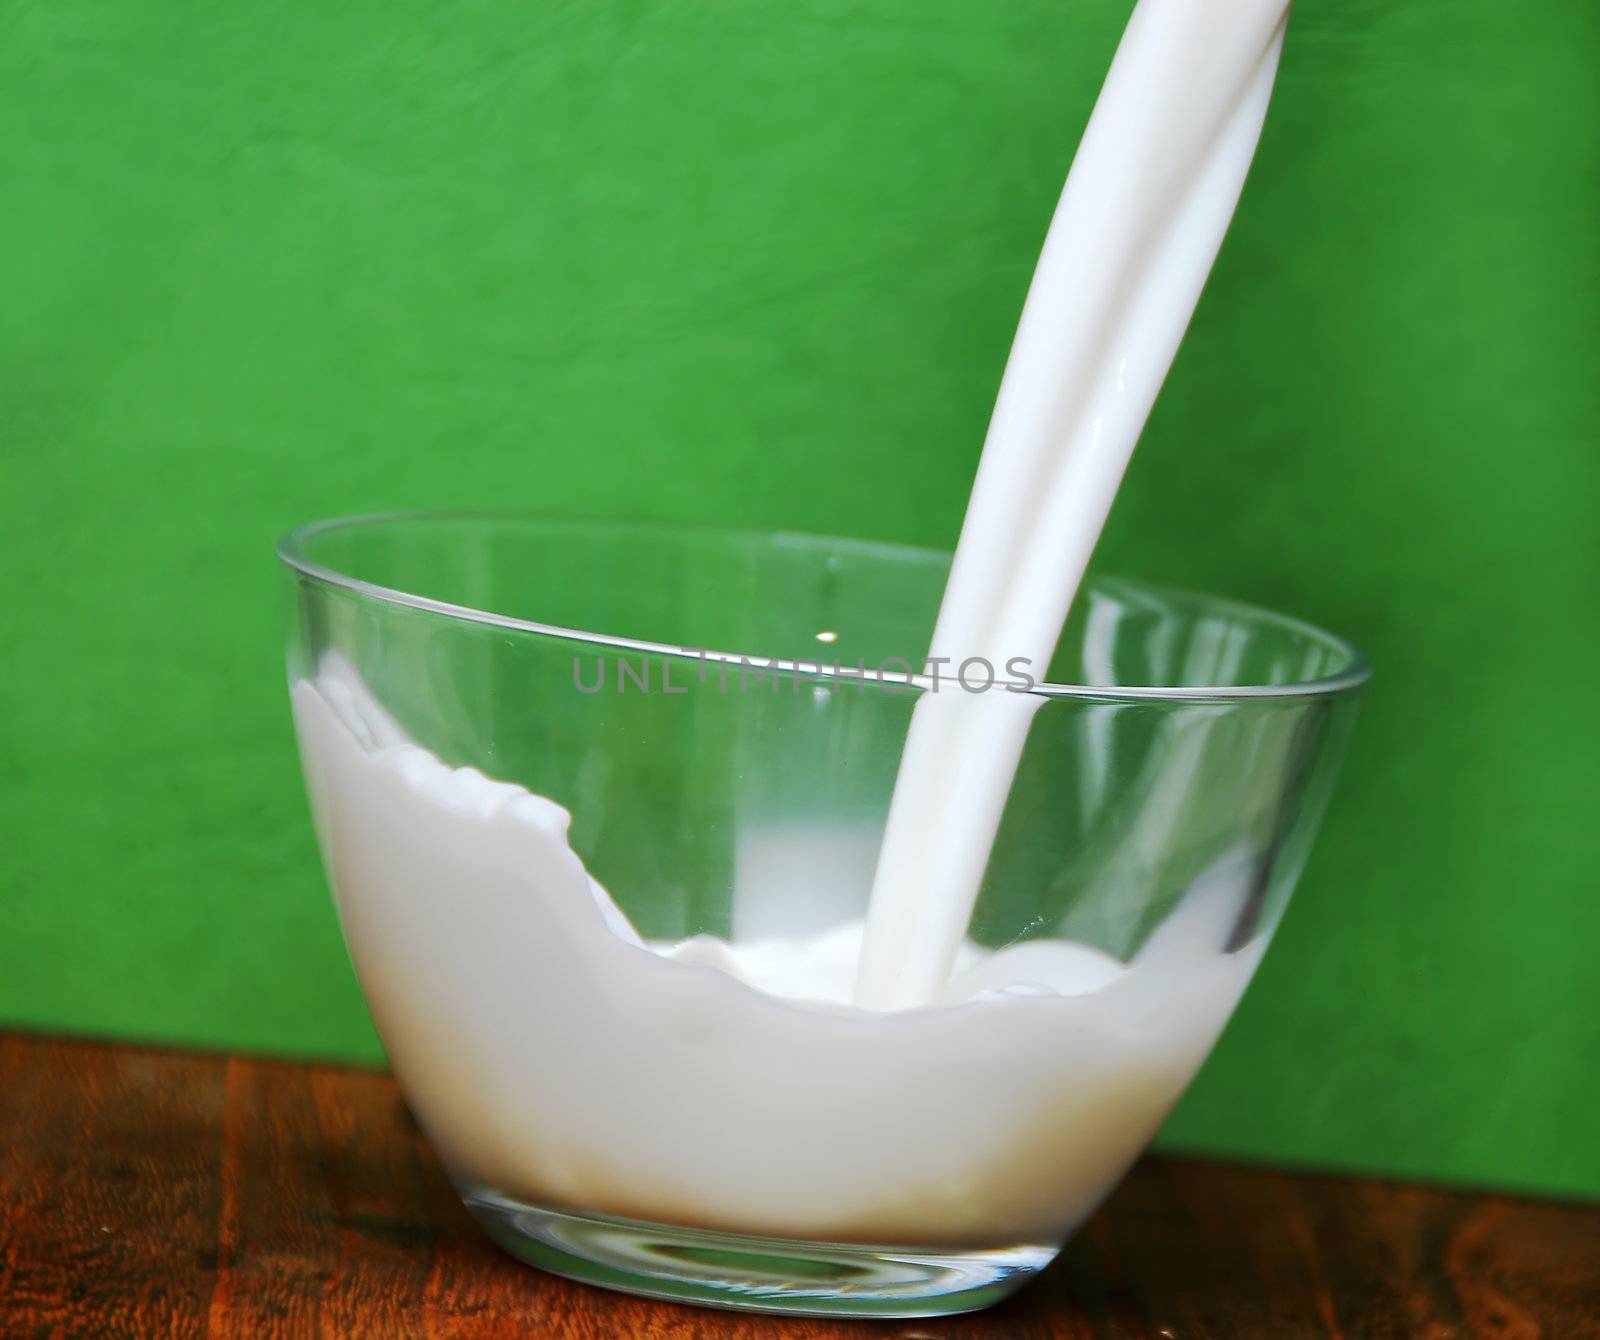 Pouring milk by simply